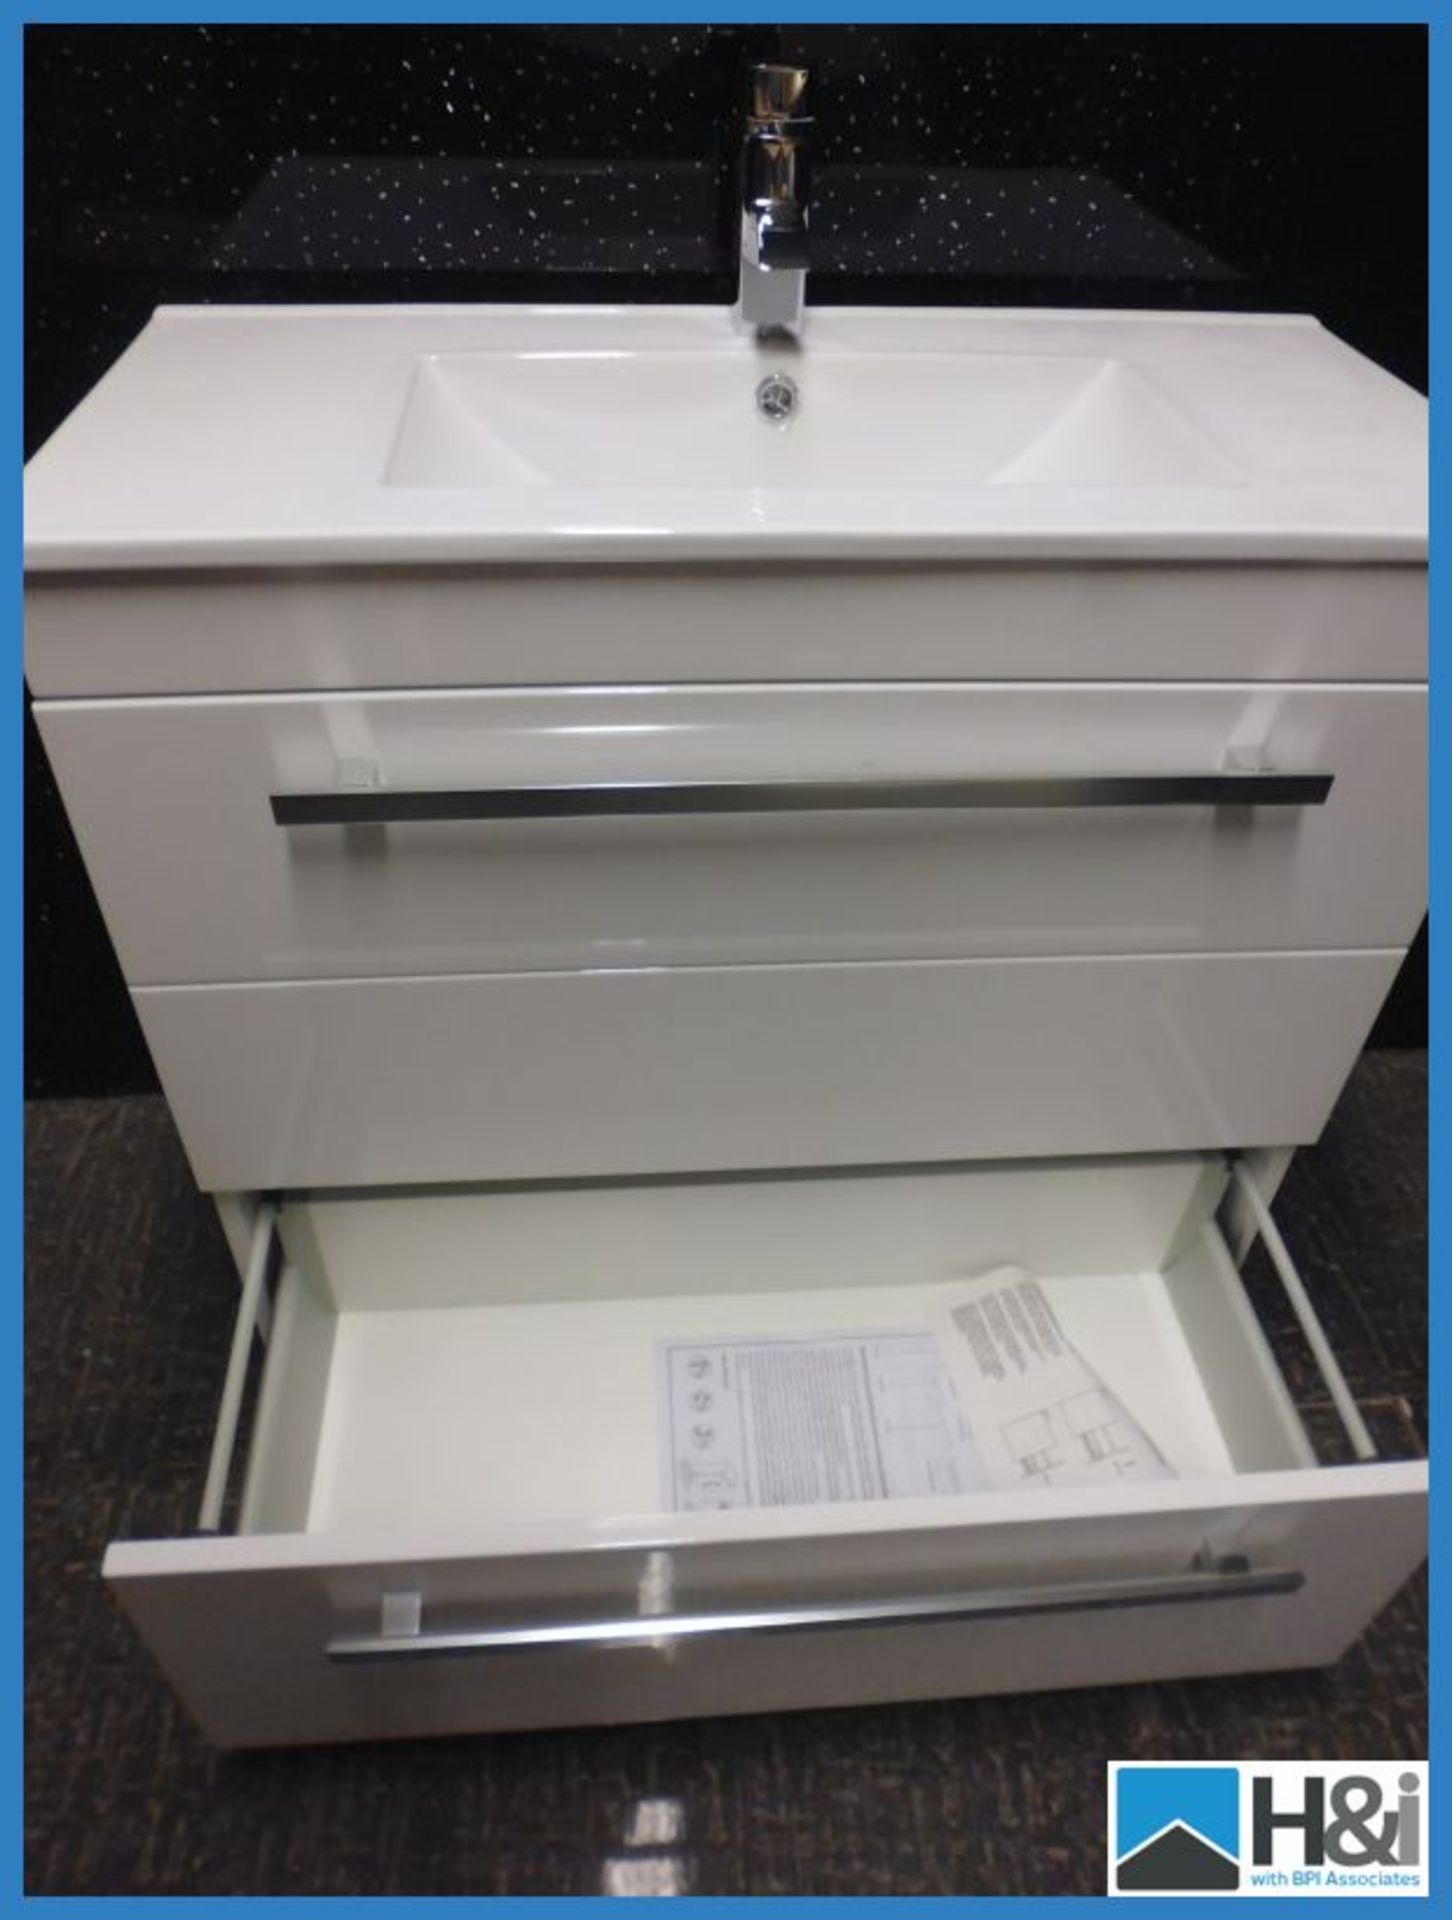 Designer Floor Mounted Minimalist Basin & Cabinet in Gloss White with 2 Soft Close Drawers. Comes - Image 4 of 5